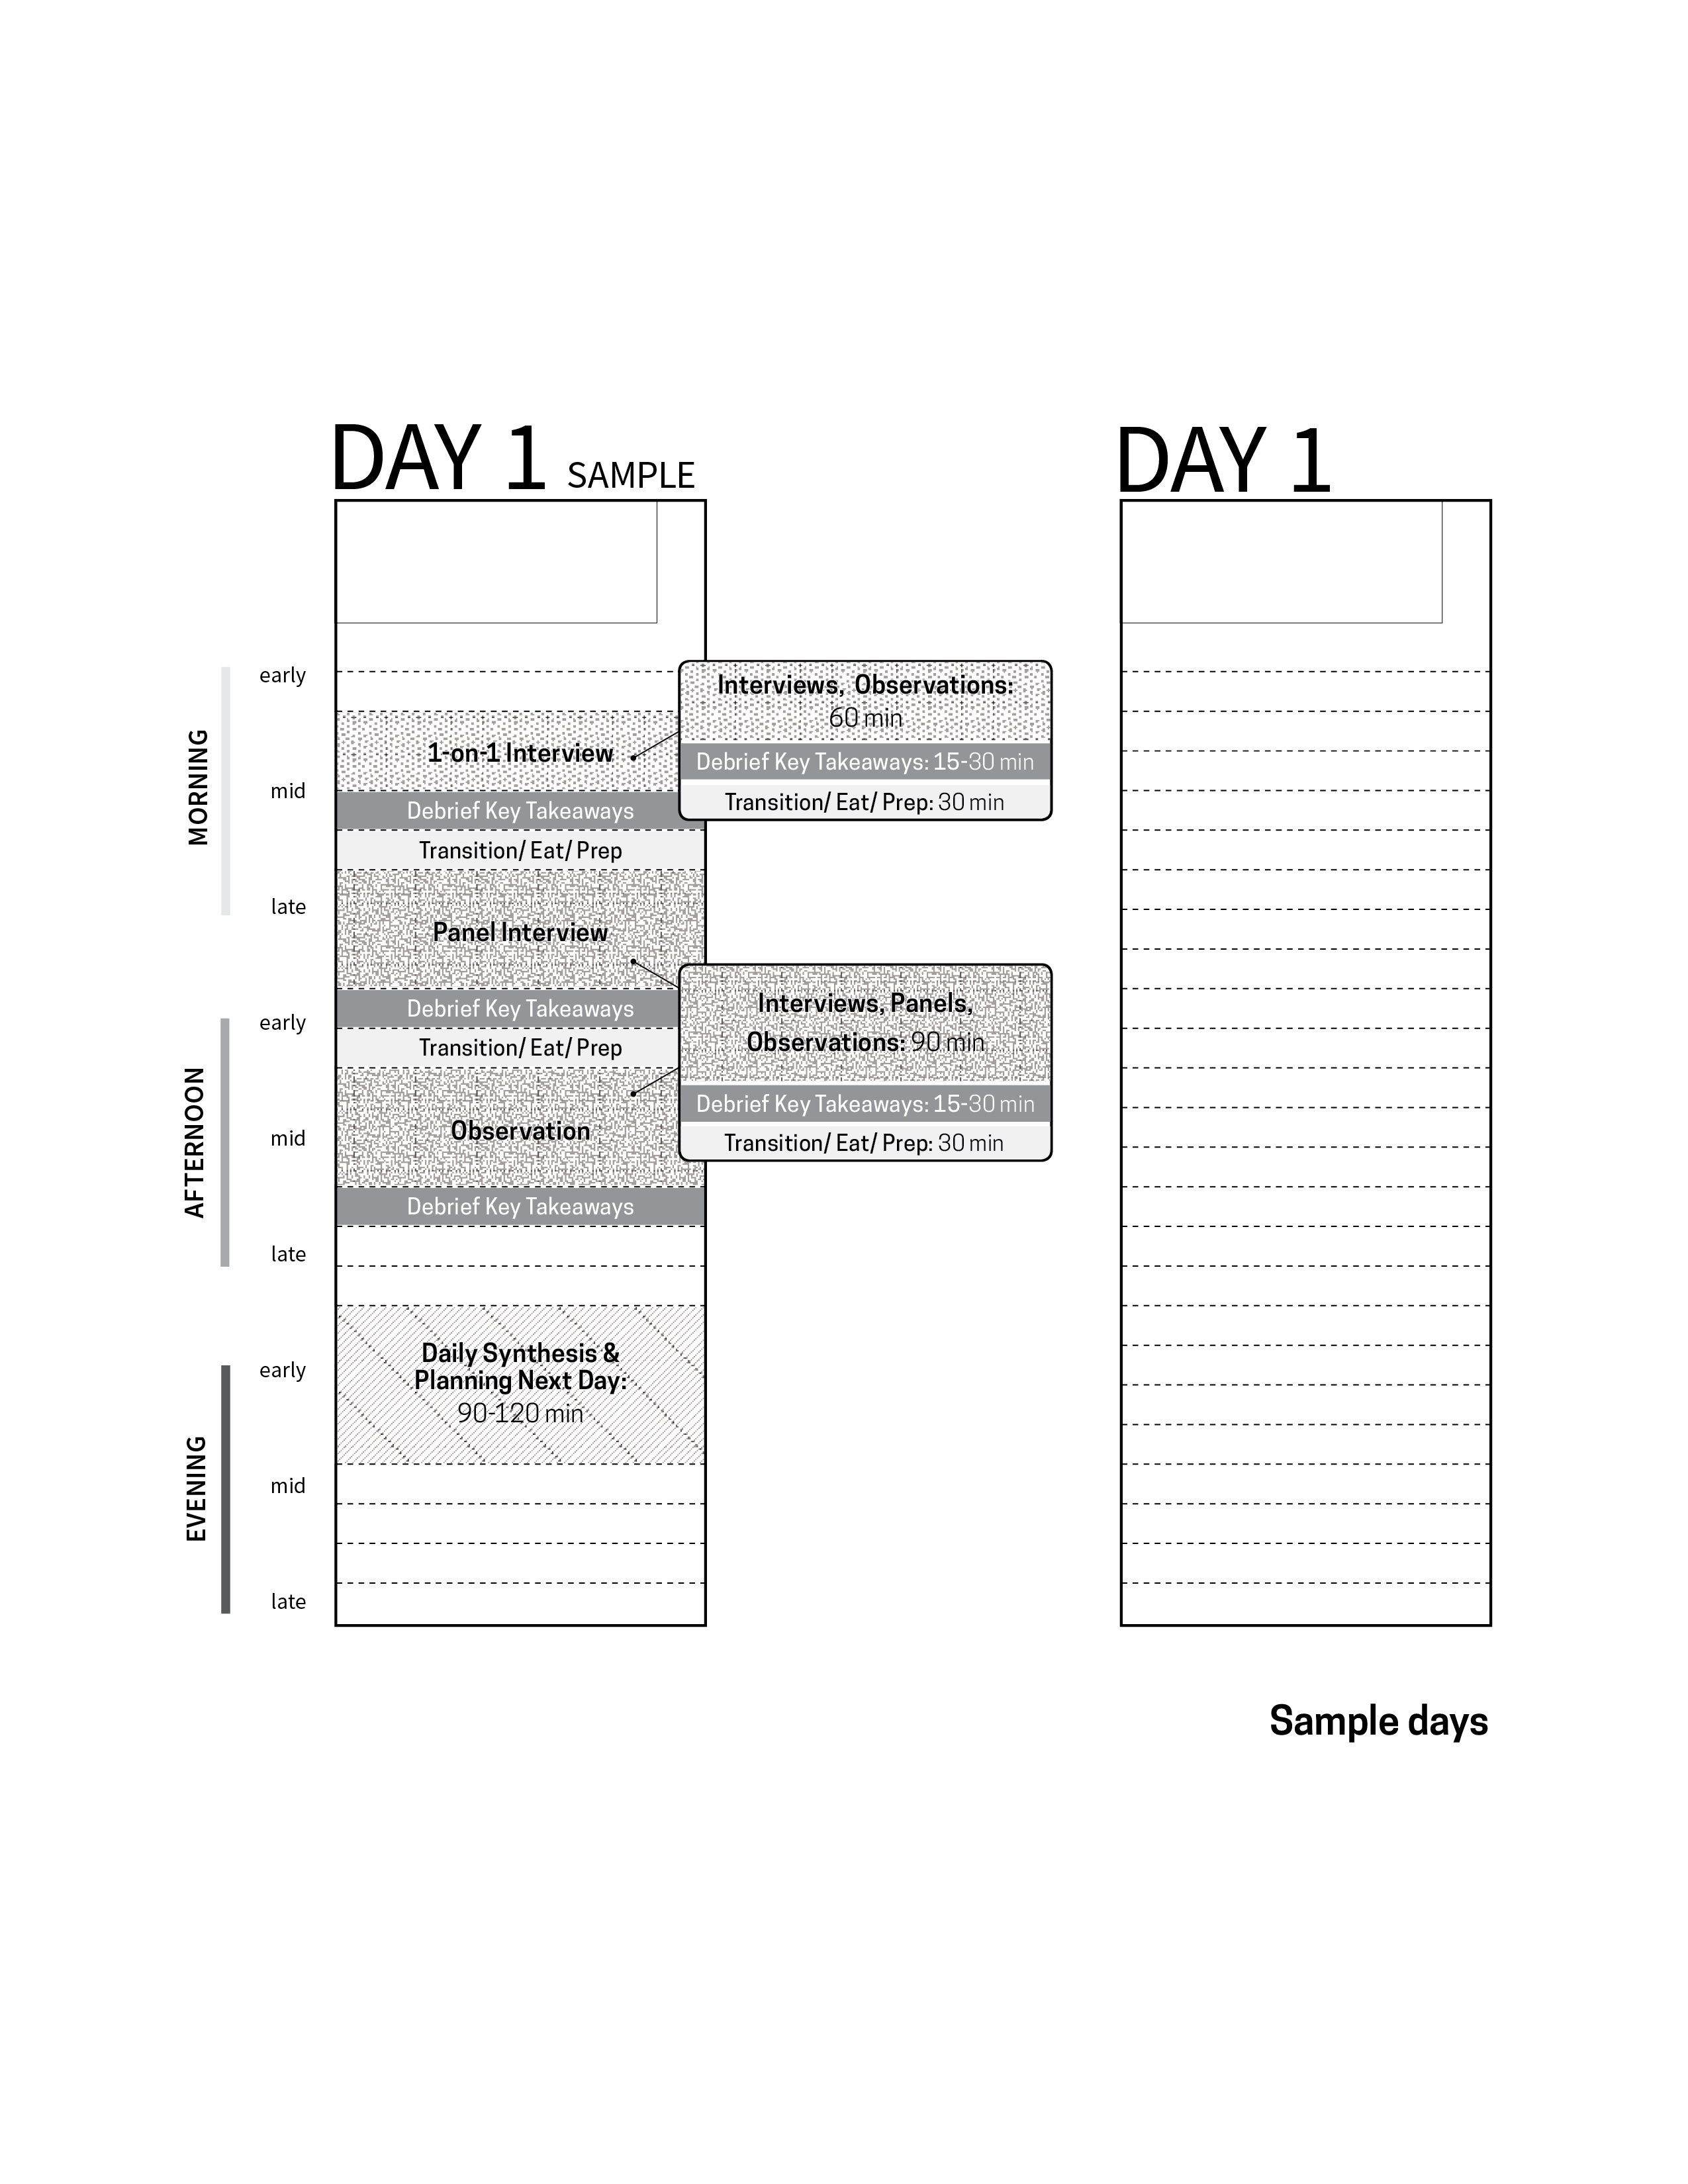 Basic framework for scheduling research days.